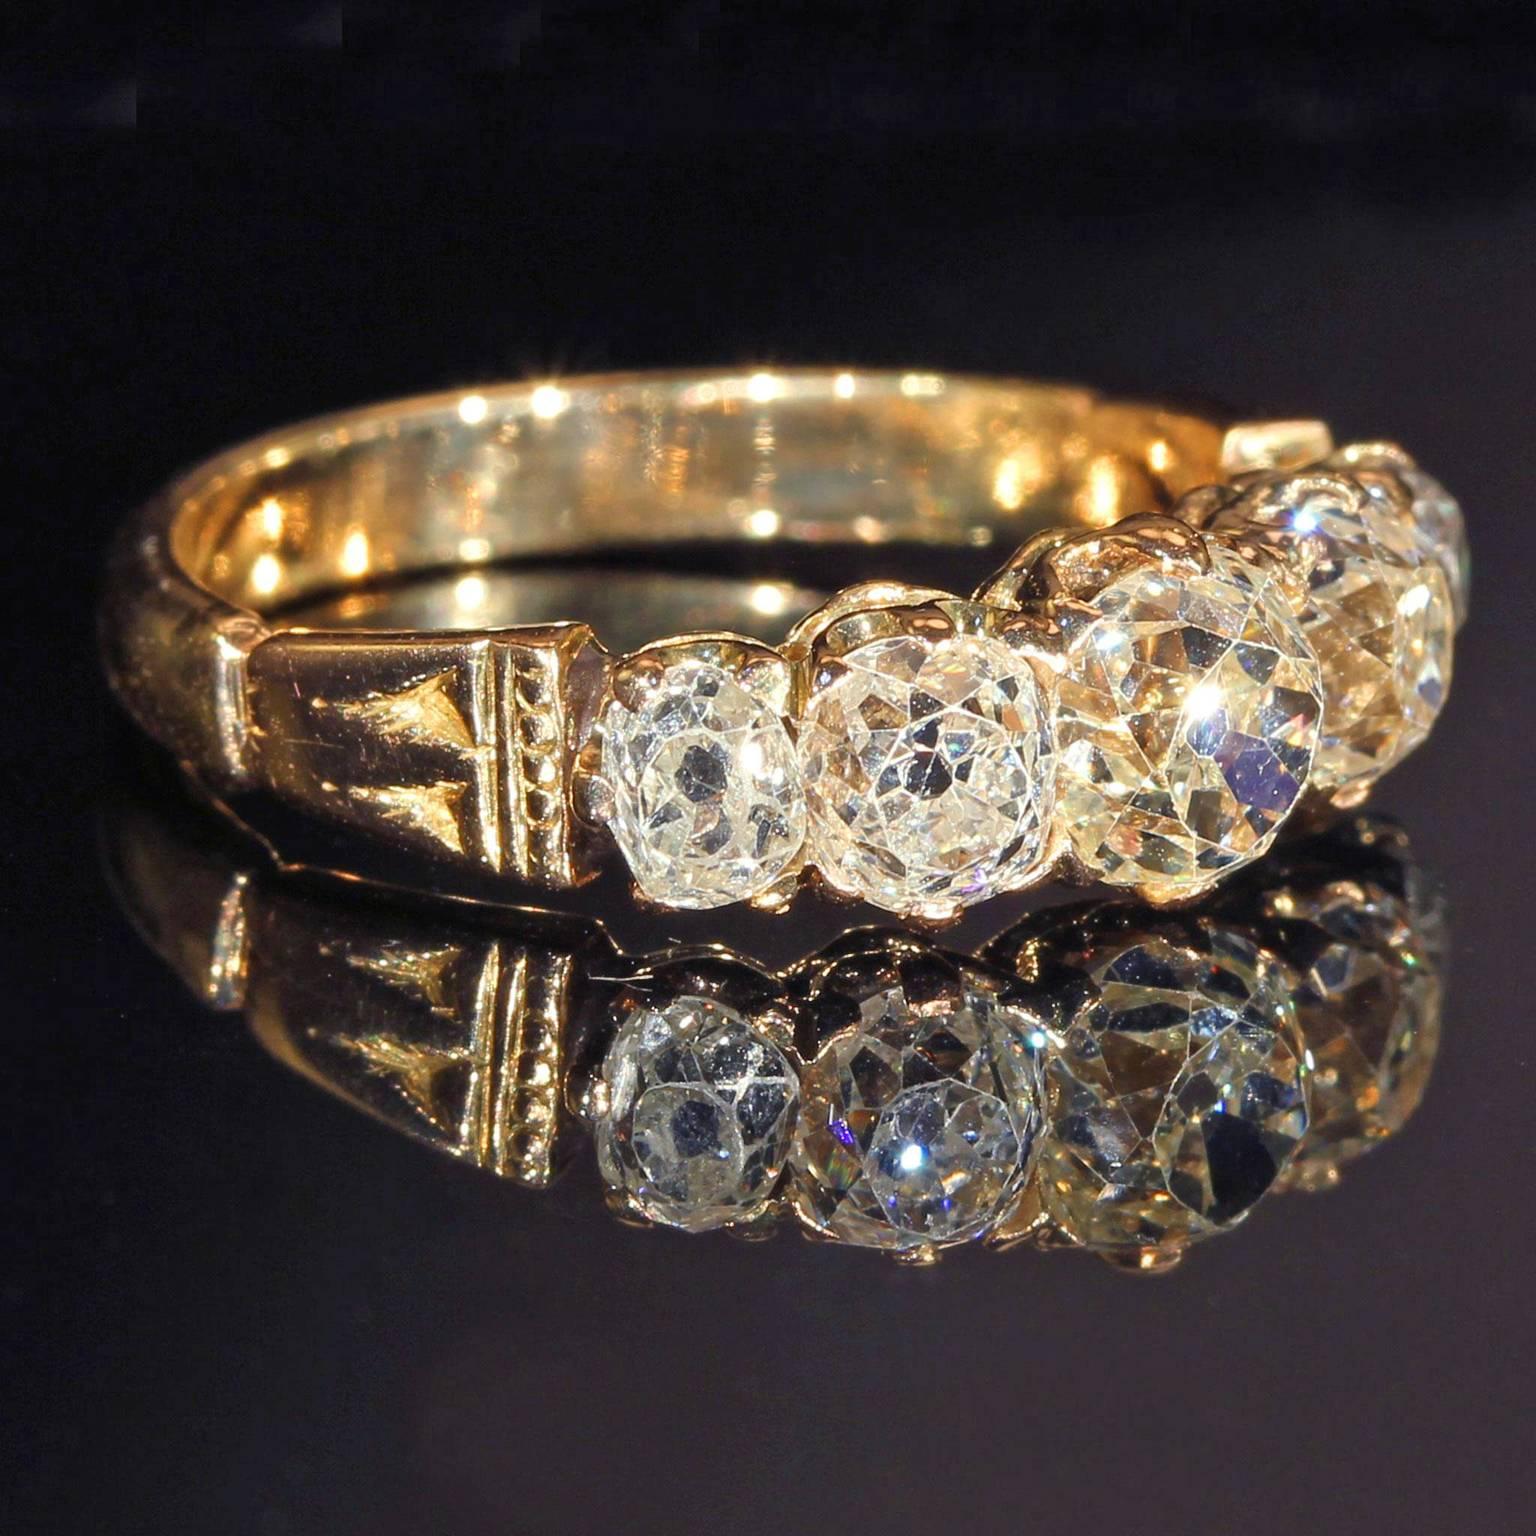 Once you start wearing Old cut diamonds, it’s very hard to go back. These individually hand cut artisanal stones have such a personality and life of their own. This Victorian five stone diamond ring was made in about 1870. 

This ring was hand